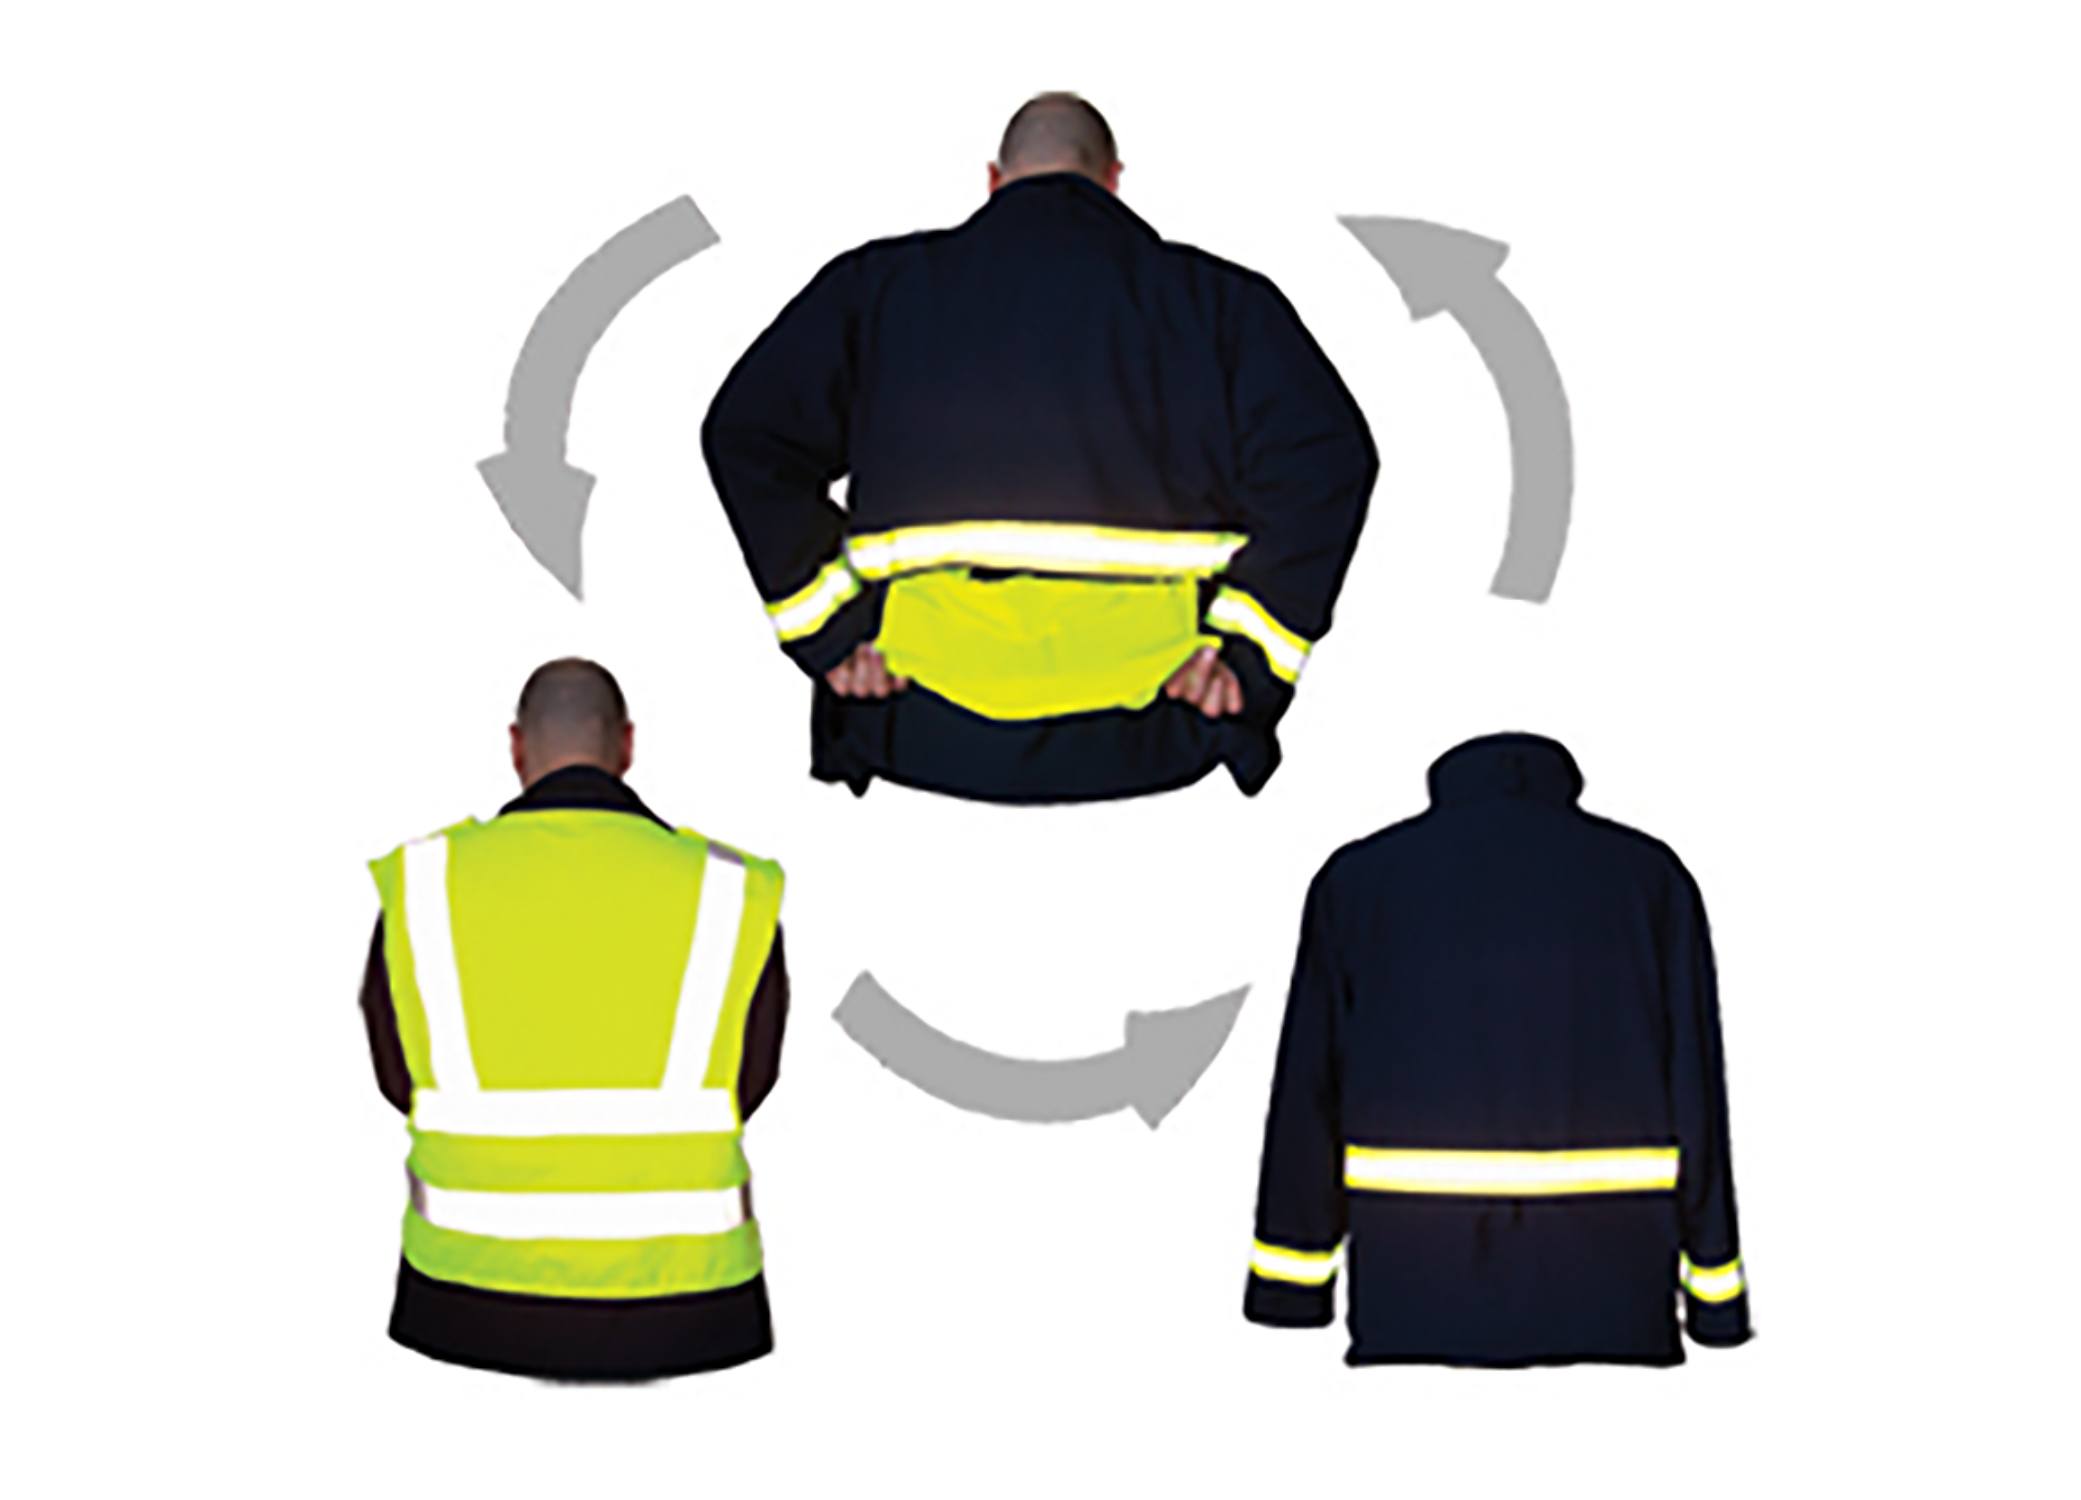 ReadyVIZ integrated into Ricochet’s NFPA-1999 certified NOMEX® or polyester jackets